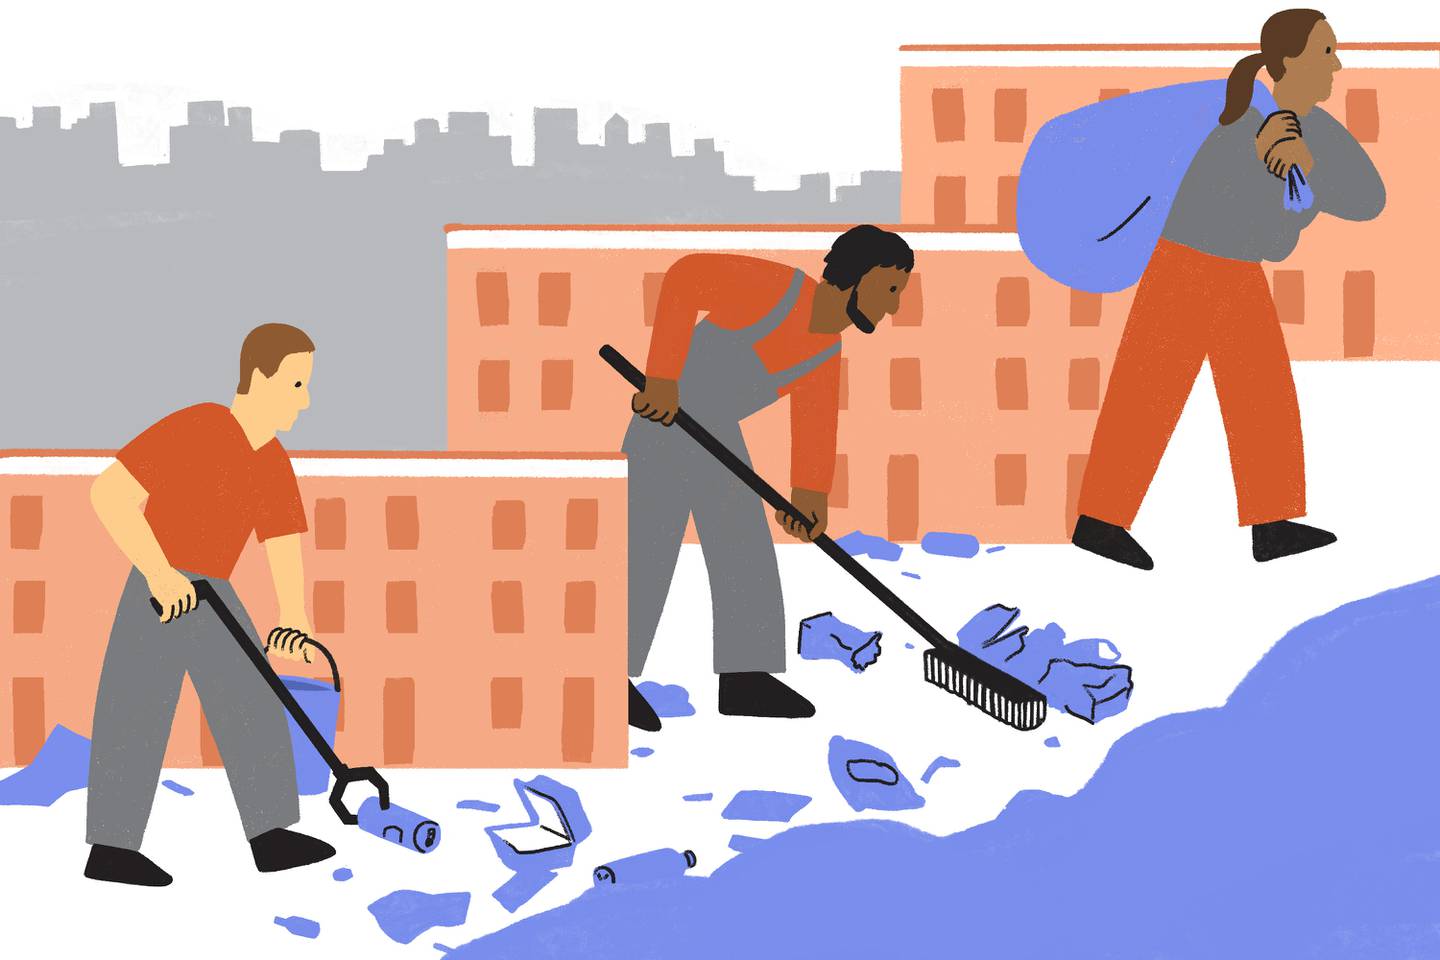 Illustration of three workers removing trash from street in front of townhomes, with cityscape in the background